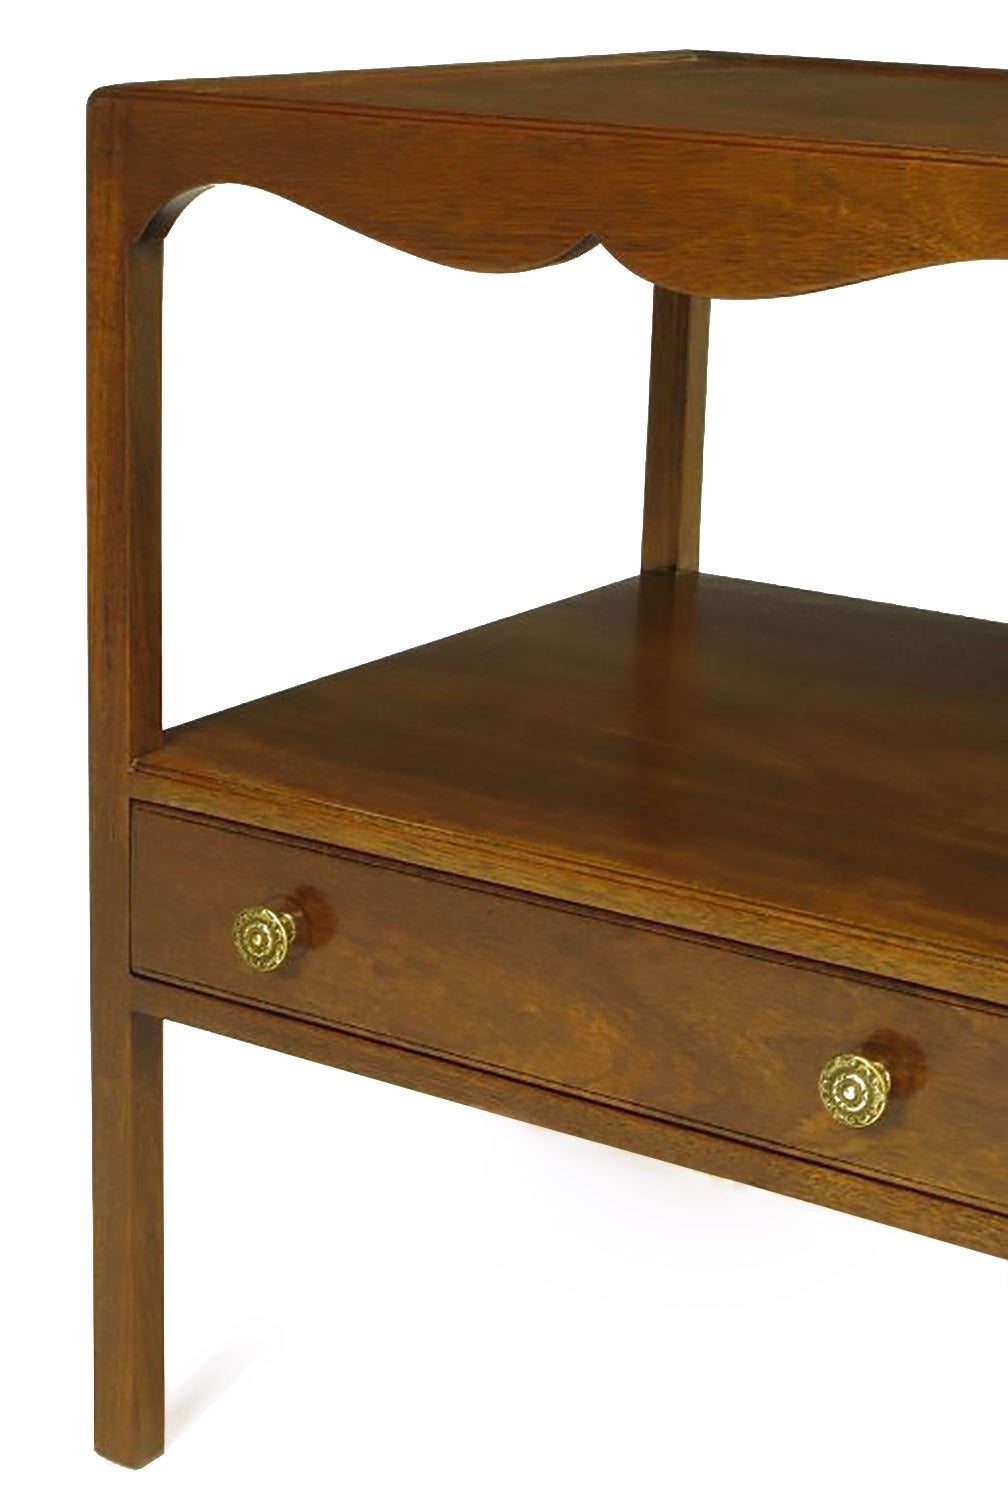 Pair of Kittinger Mahogany Scalloped Apron Nightstands with Drawers 2